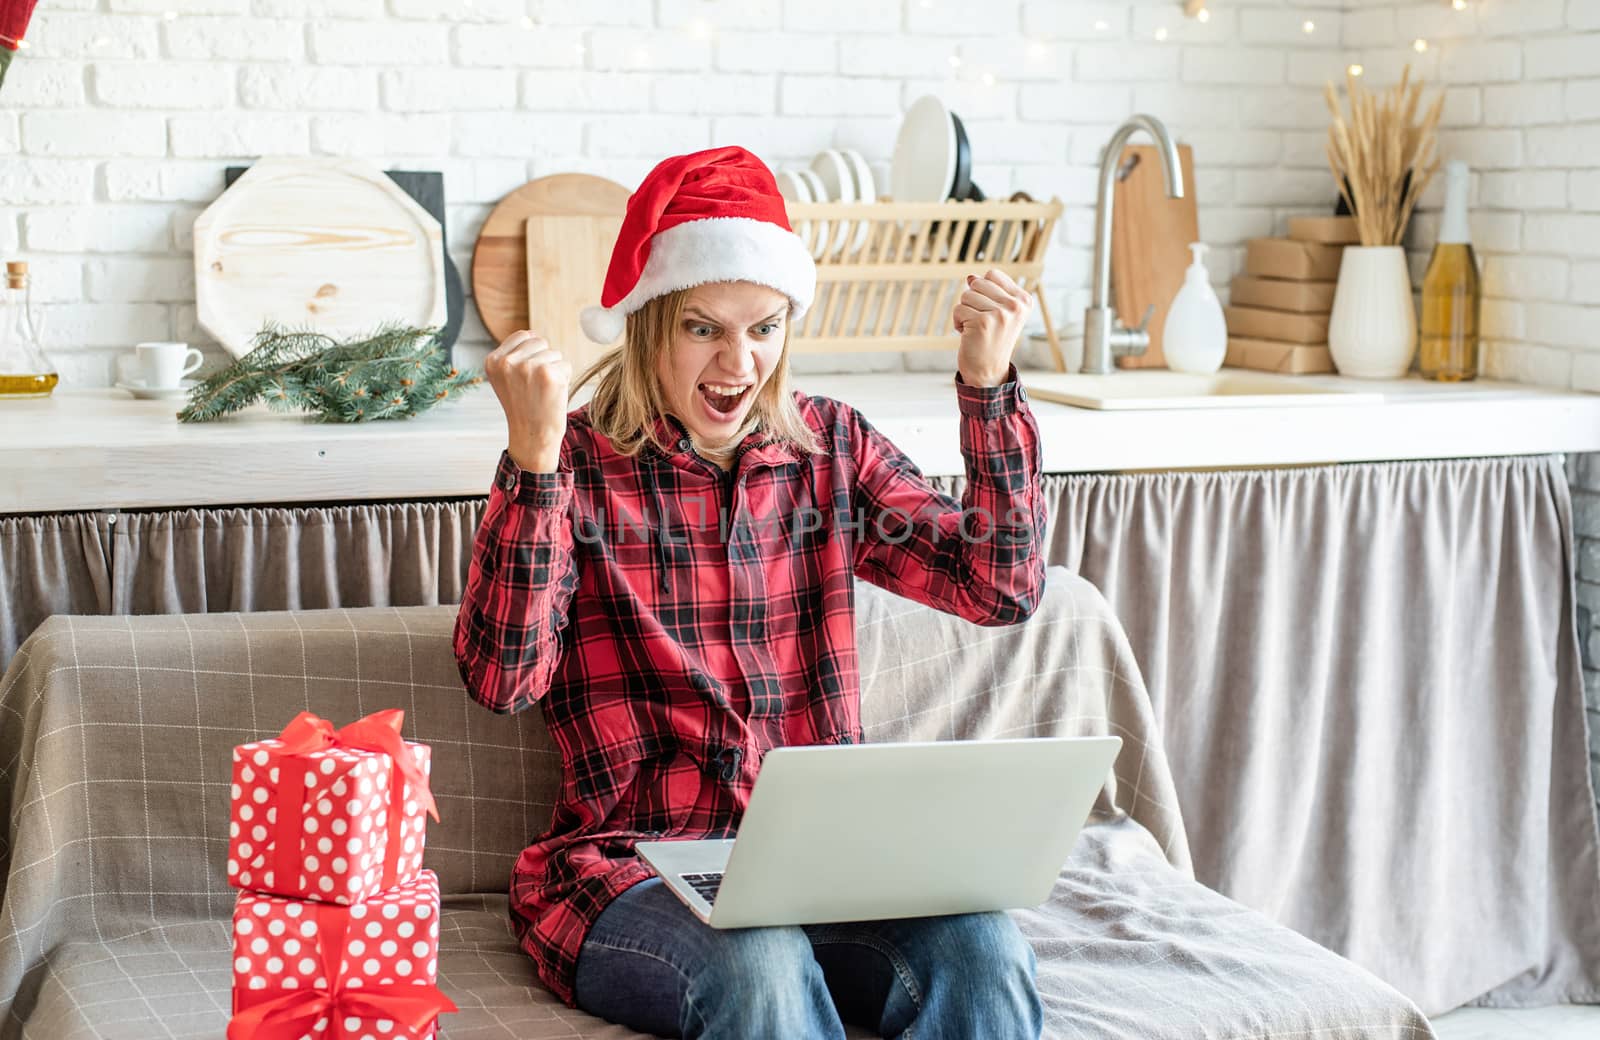 Chhristmas online greetings. Excited young woman in santa hat screaming raising her hands working at the laptop